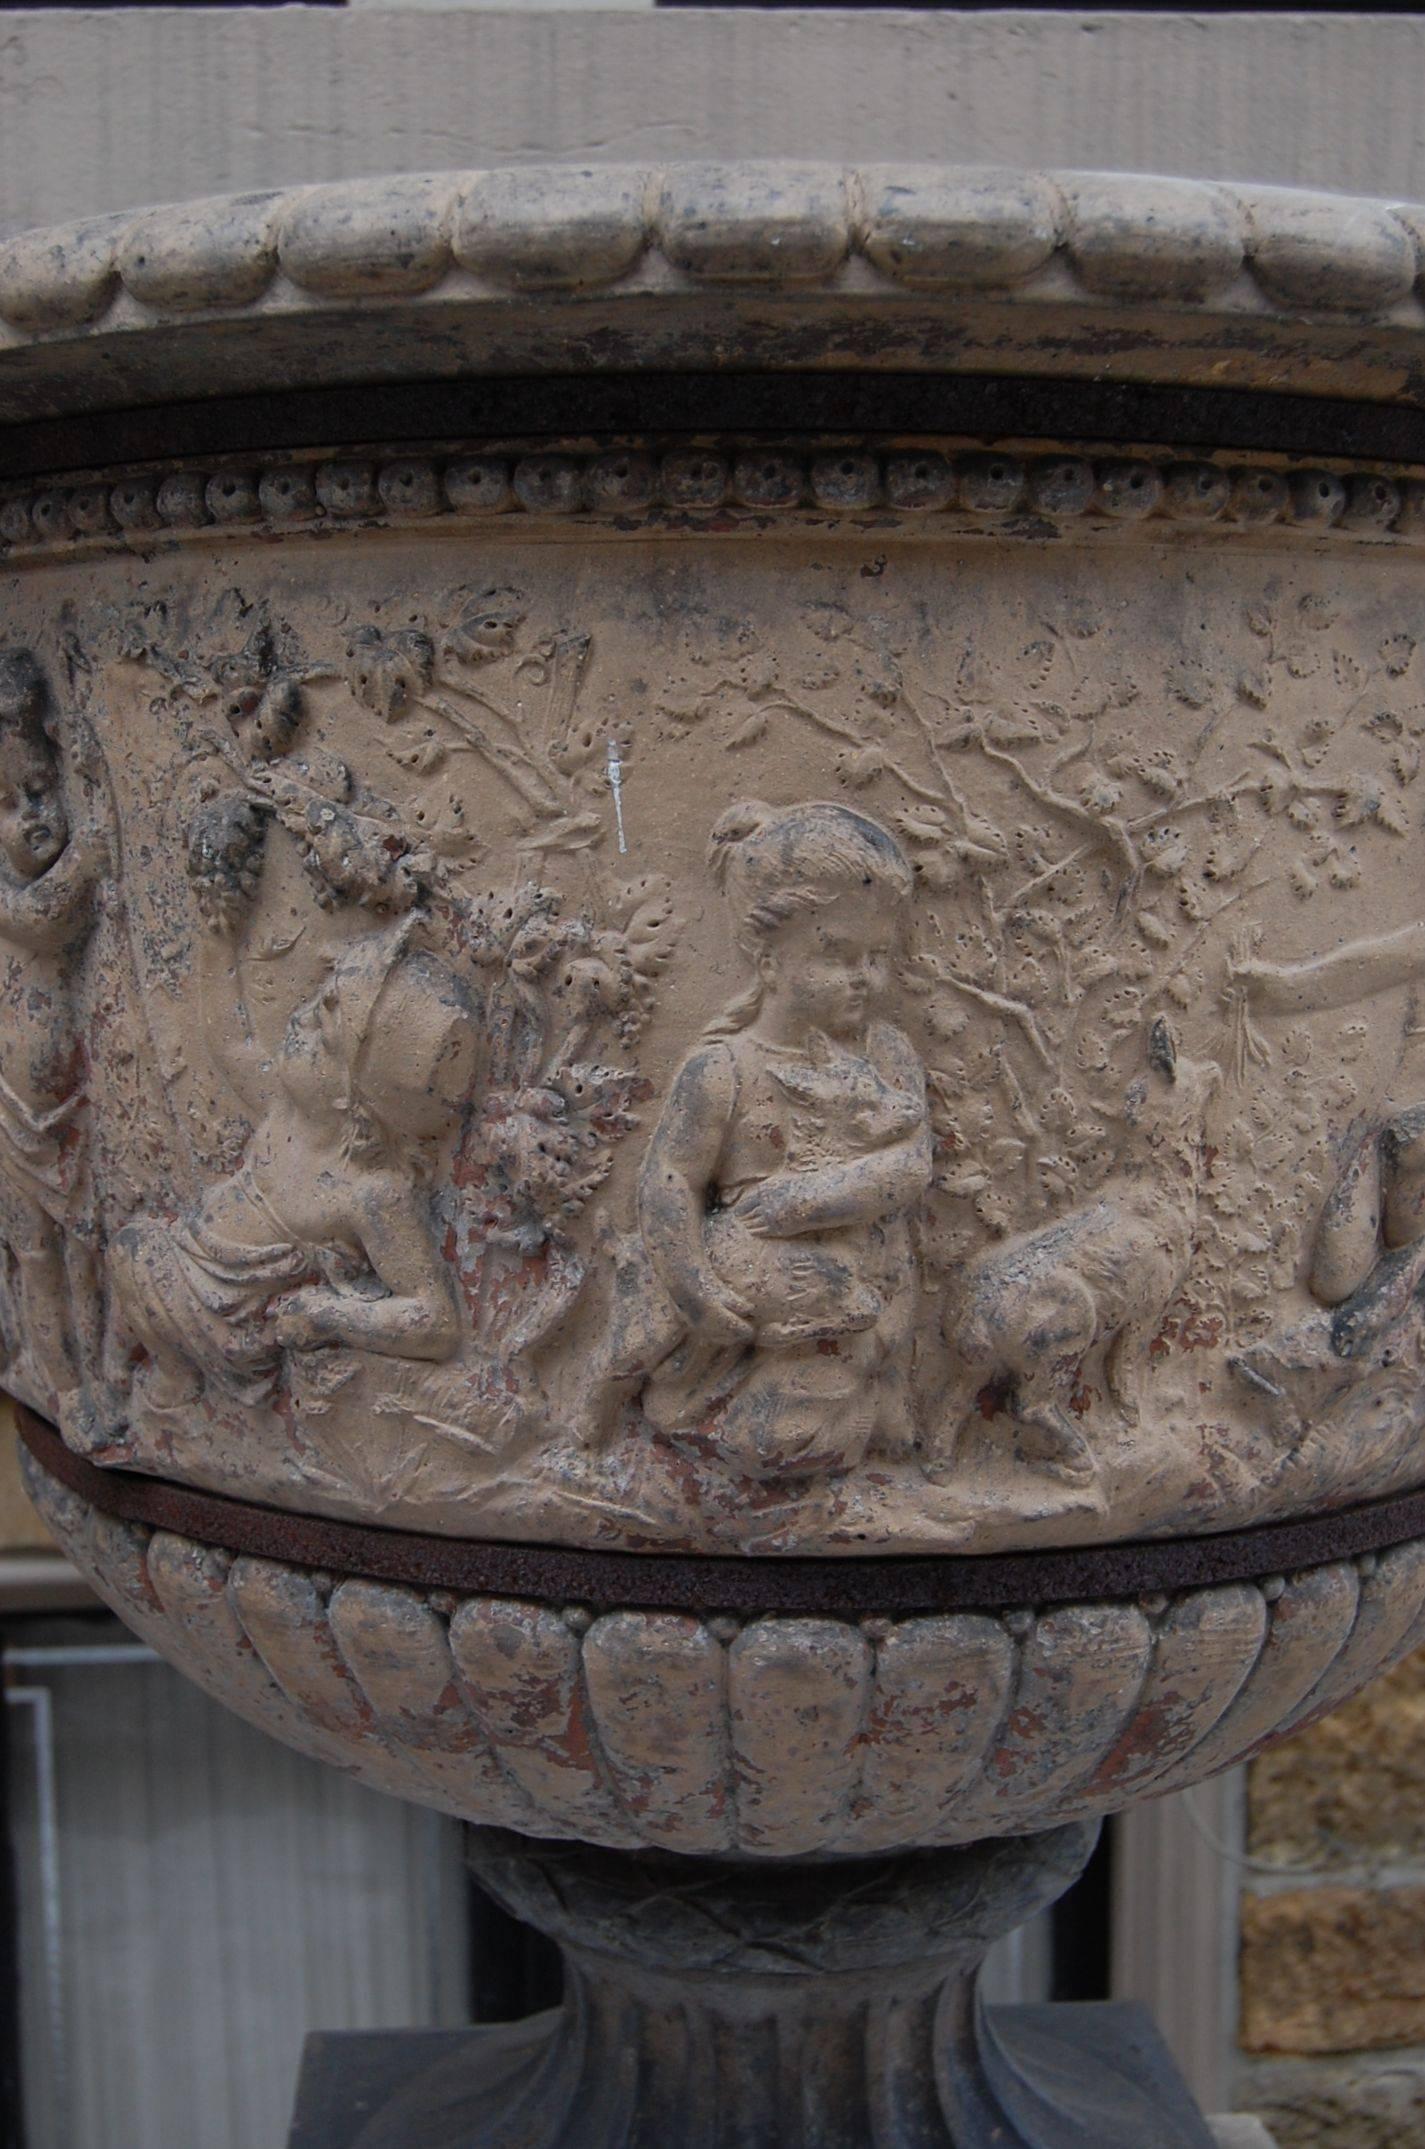 Italian Large Classically Styled 19th Century Terracotta Urn on Modern Cement Plinth For Sale